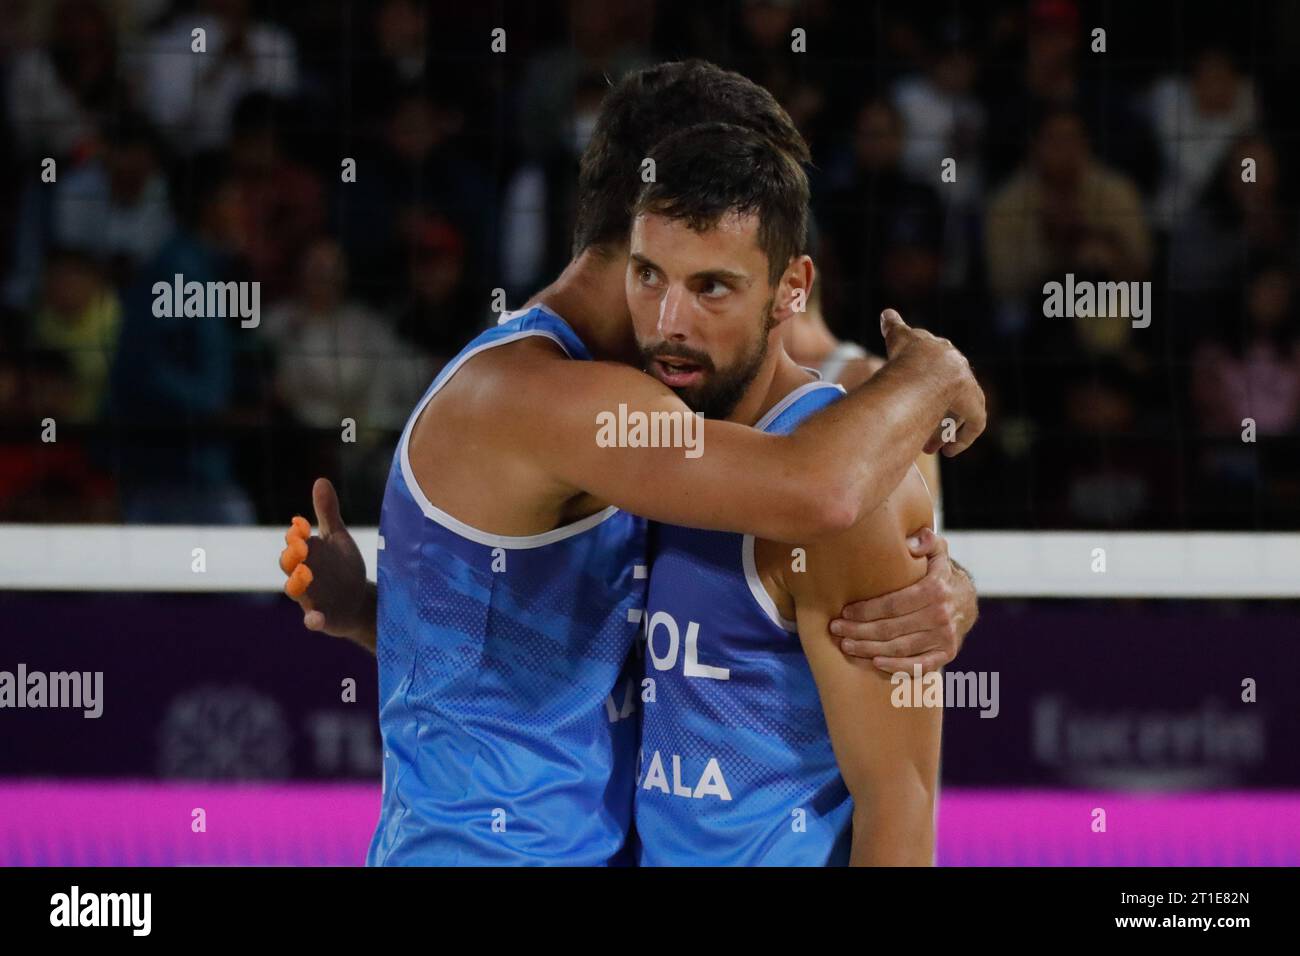 October 12, 2023, Tlaxcala, Mexico: Bartosz Losiak (R) and Michal Bryl of Poland   compite against team Germany during the Beach Volleyball World Cup  Women's Quarterfinals between USA and Latvia. on October 12, 2023 in Tlaxcala, Mexico. (Photo by Essene Hernandez/ Eyepix Group/Sipa USA) Stock Photo